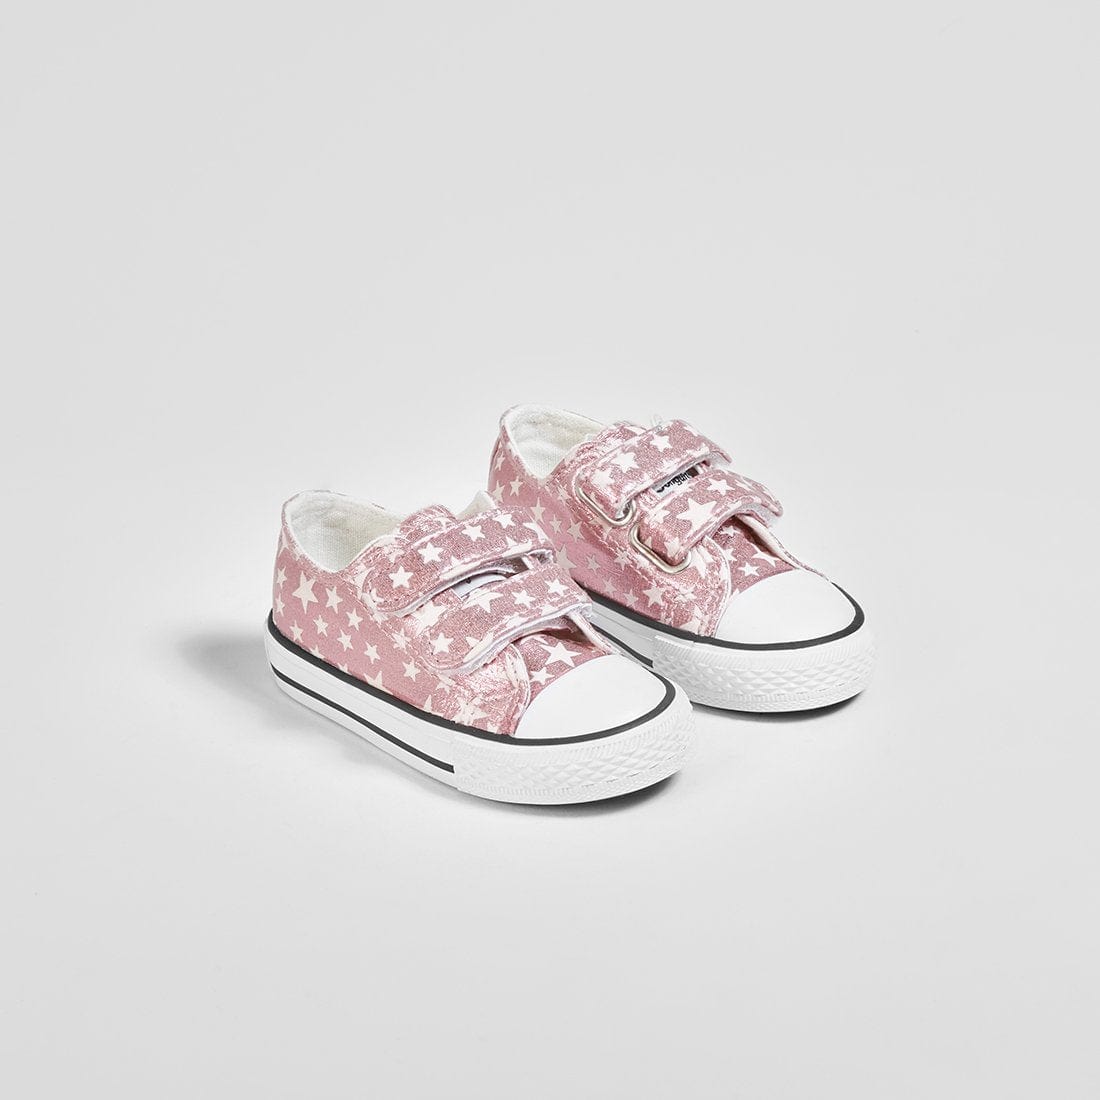 OSITO Shoes Babies Pink Stars Sneakers